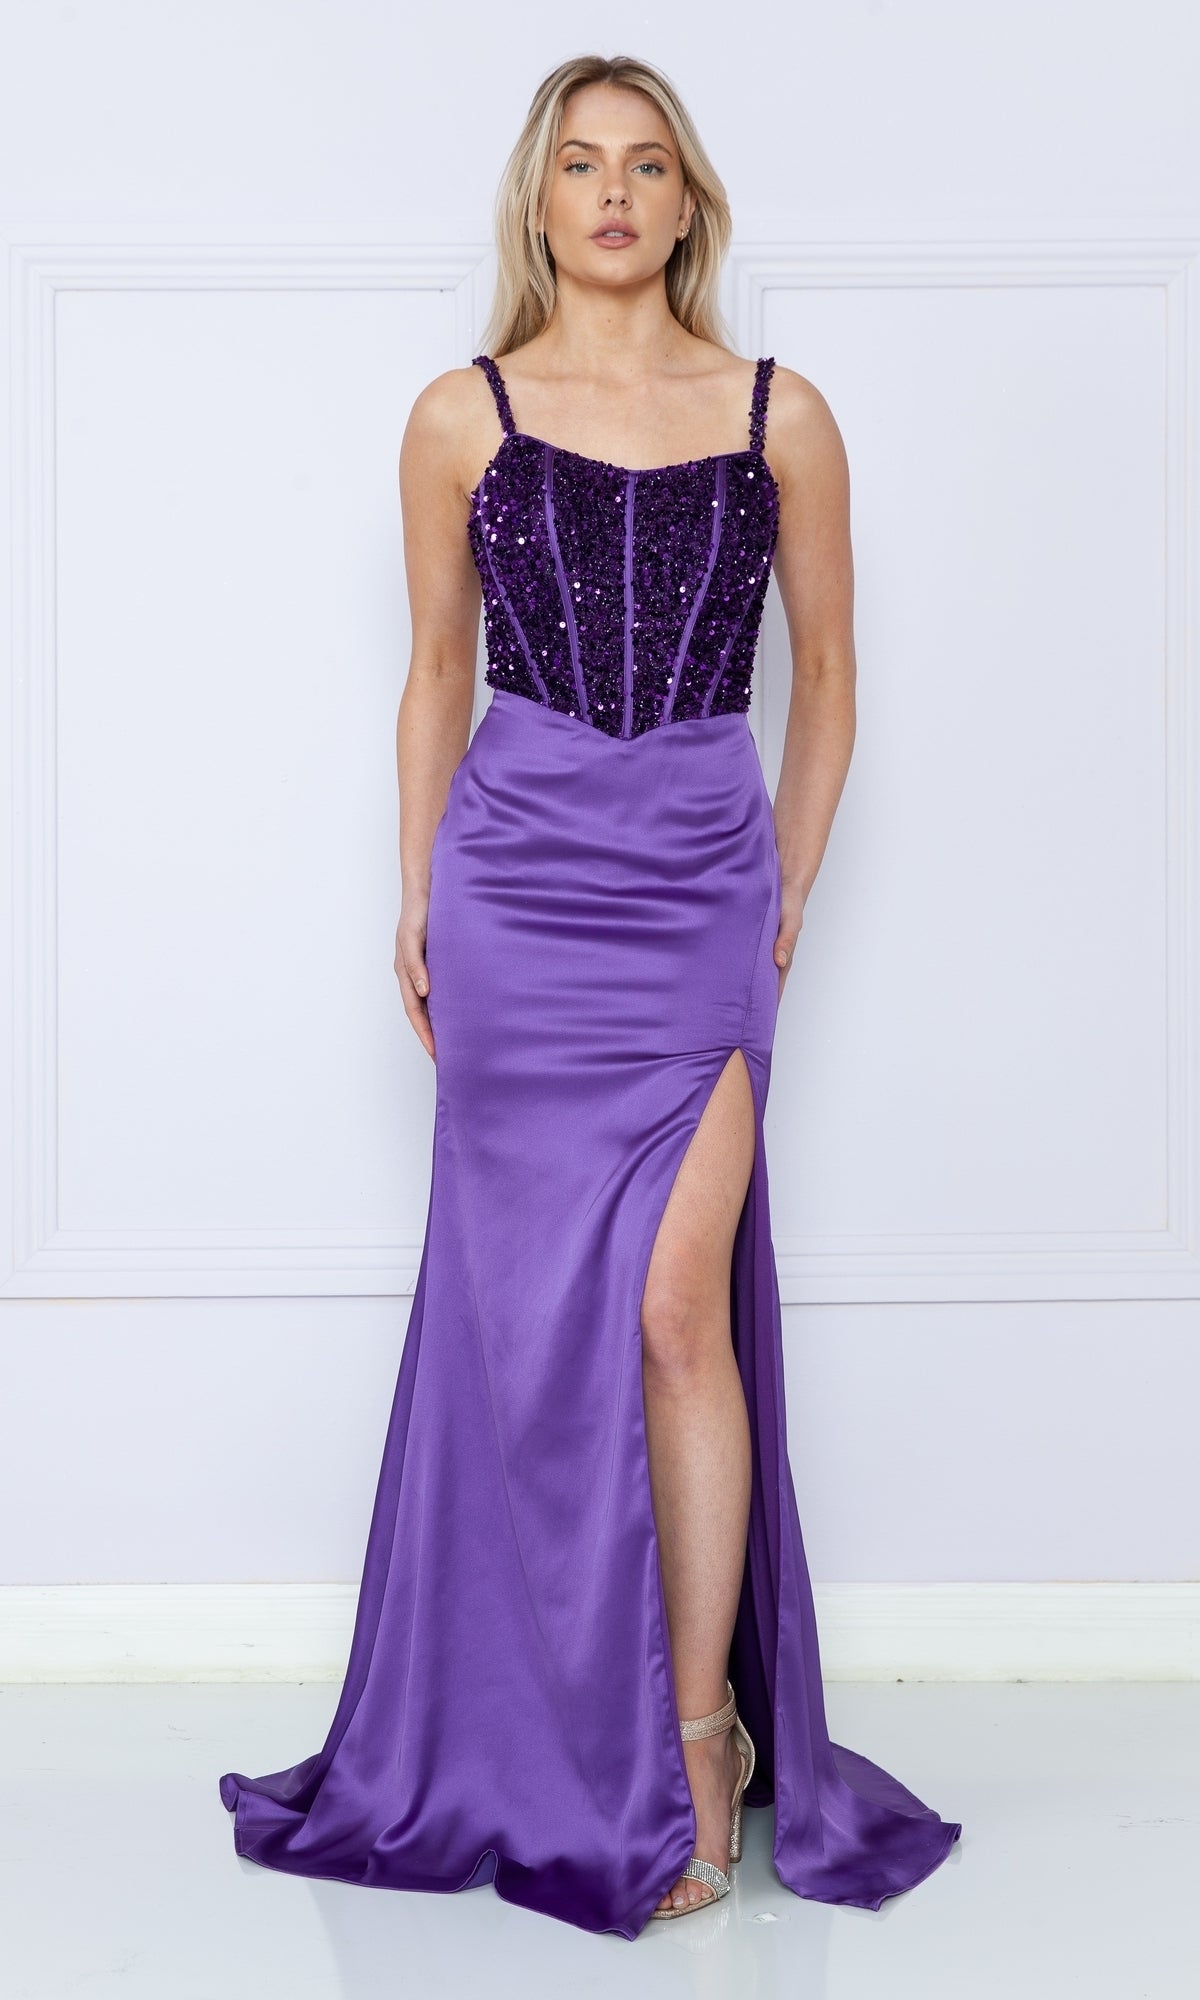 Lace-Up Sequin-Bodice Long Satin Prom Dress 9176